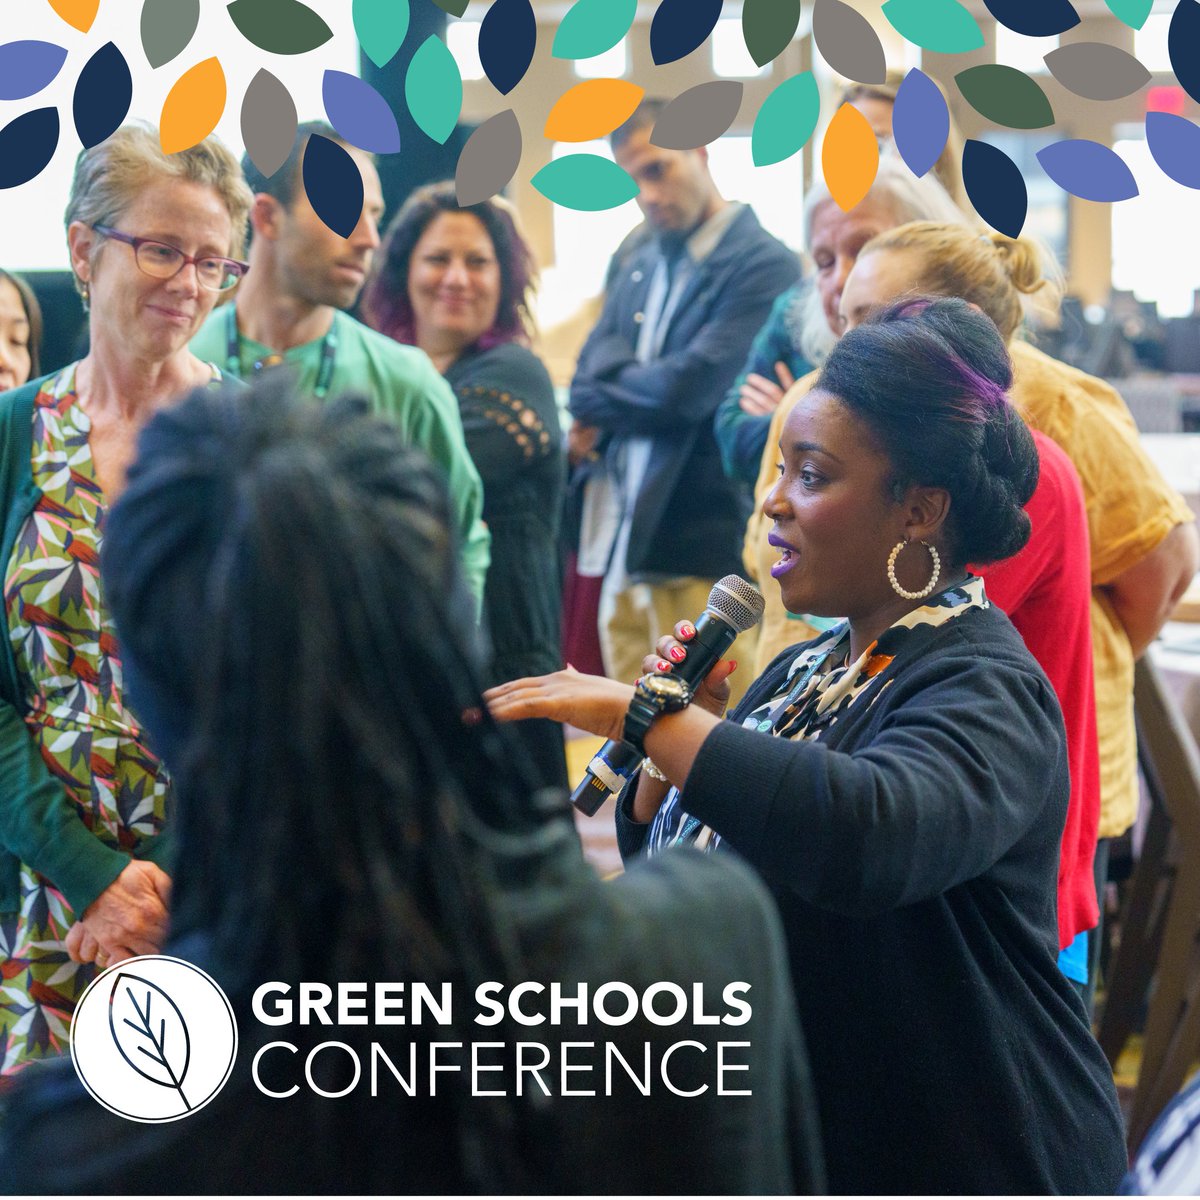 Proud to support #greenschools. Learn, collaborate, celebrate! Join the Green Schools Conference in Santa Fe for #GSC24 March 3/5-7. greenschoolsconference.org